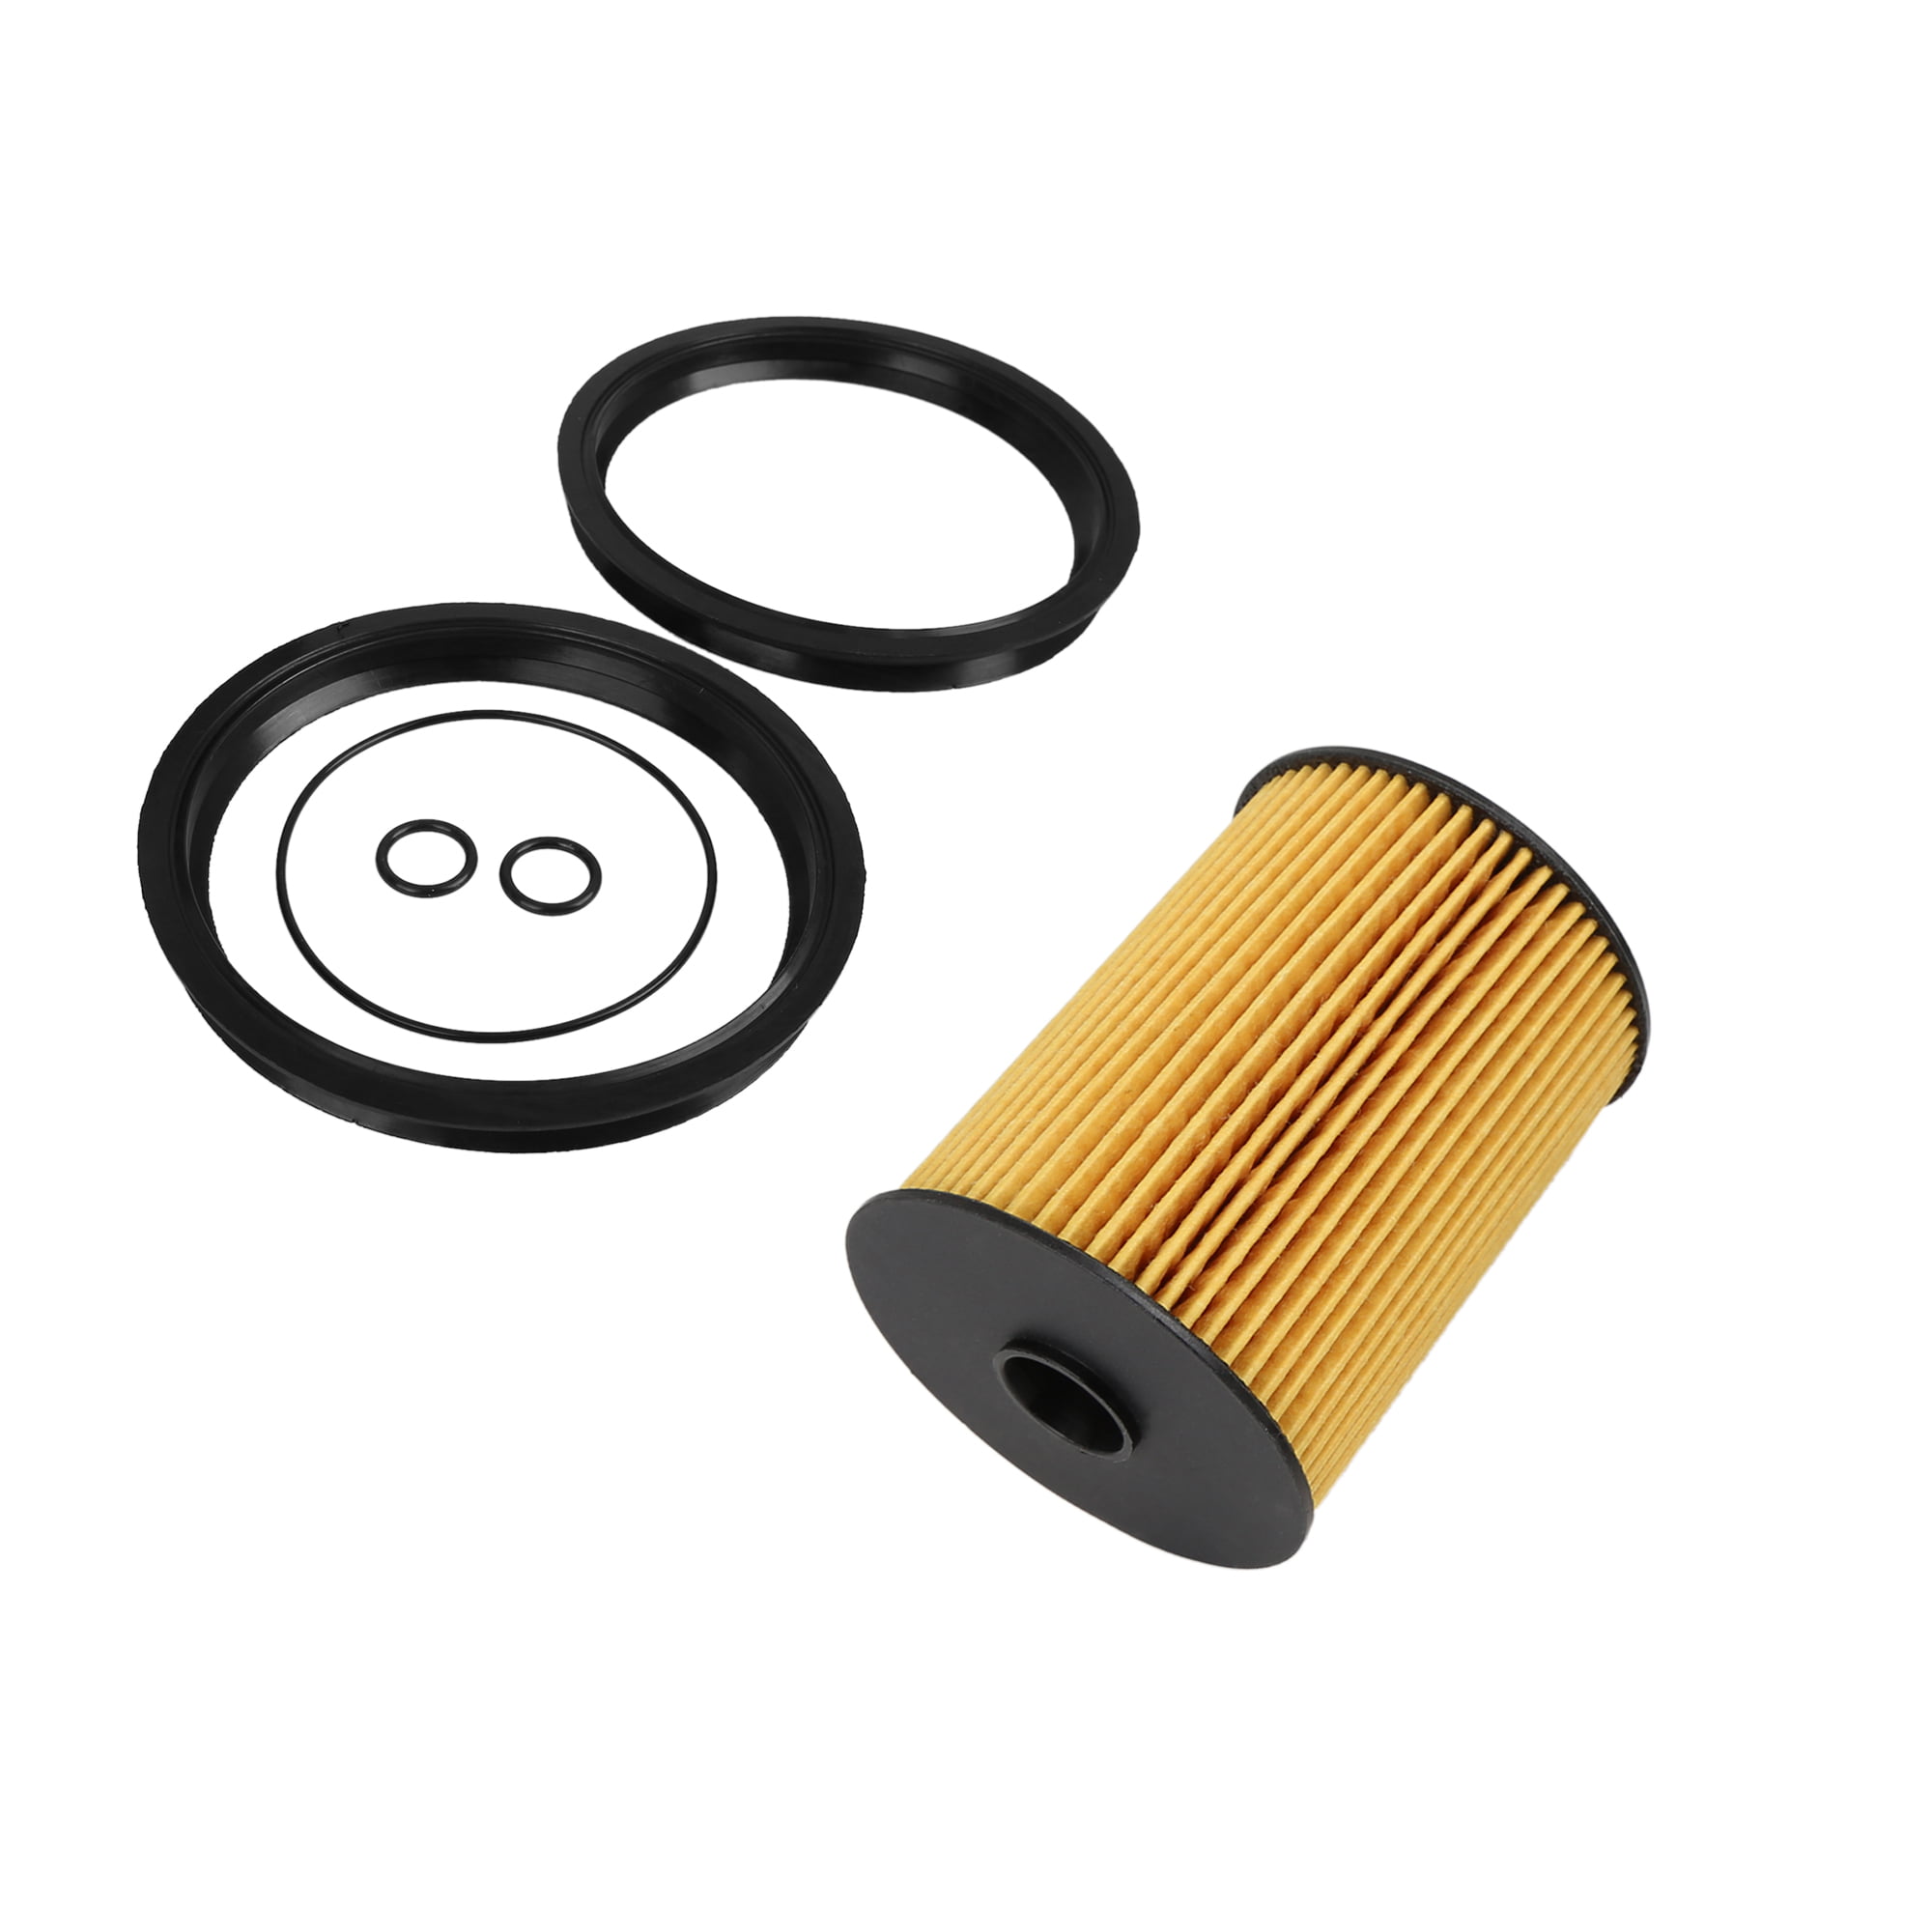 Fuel Filter Kit with O-Rings In-Tank 16146757196 for Mini Cooper 2002-2008 Fuel Filter Adapter Spacer Plate Fuel Filter 